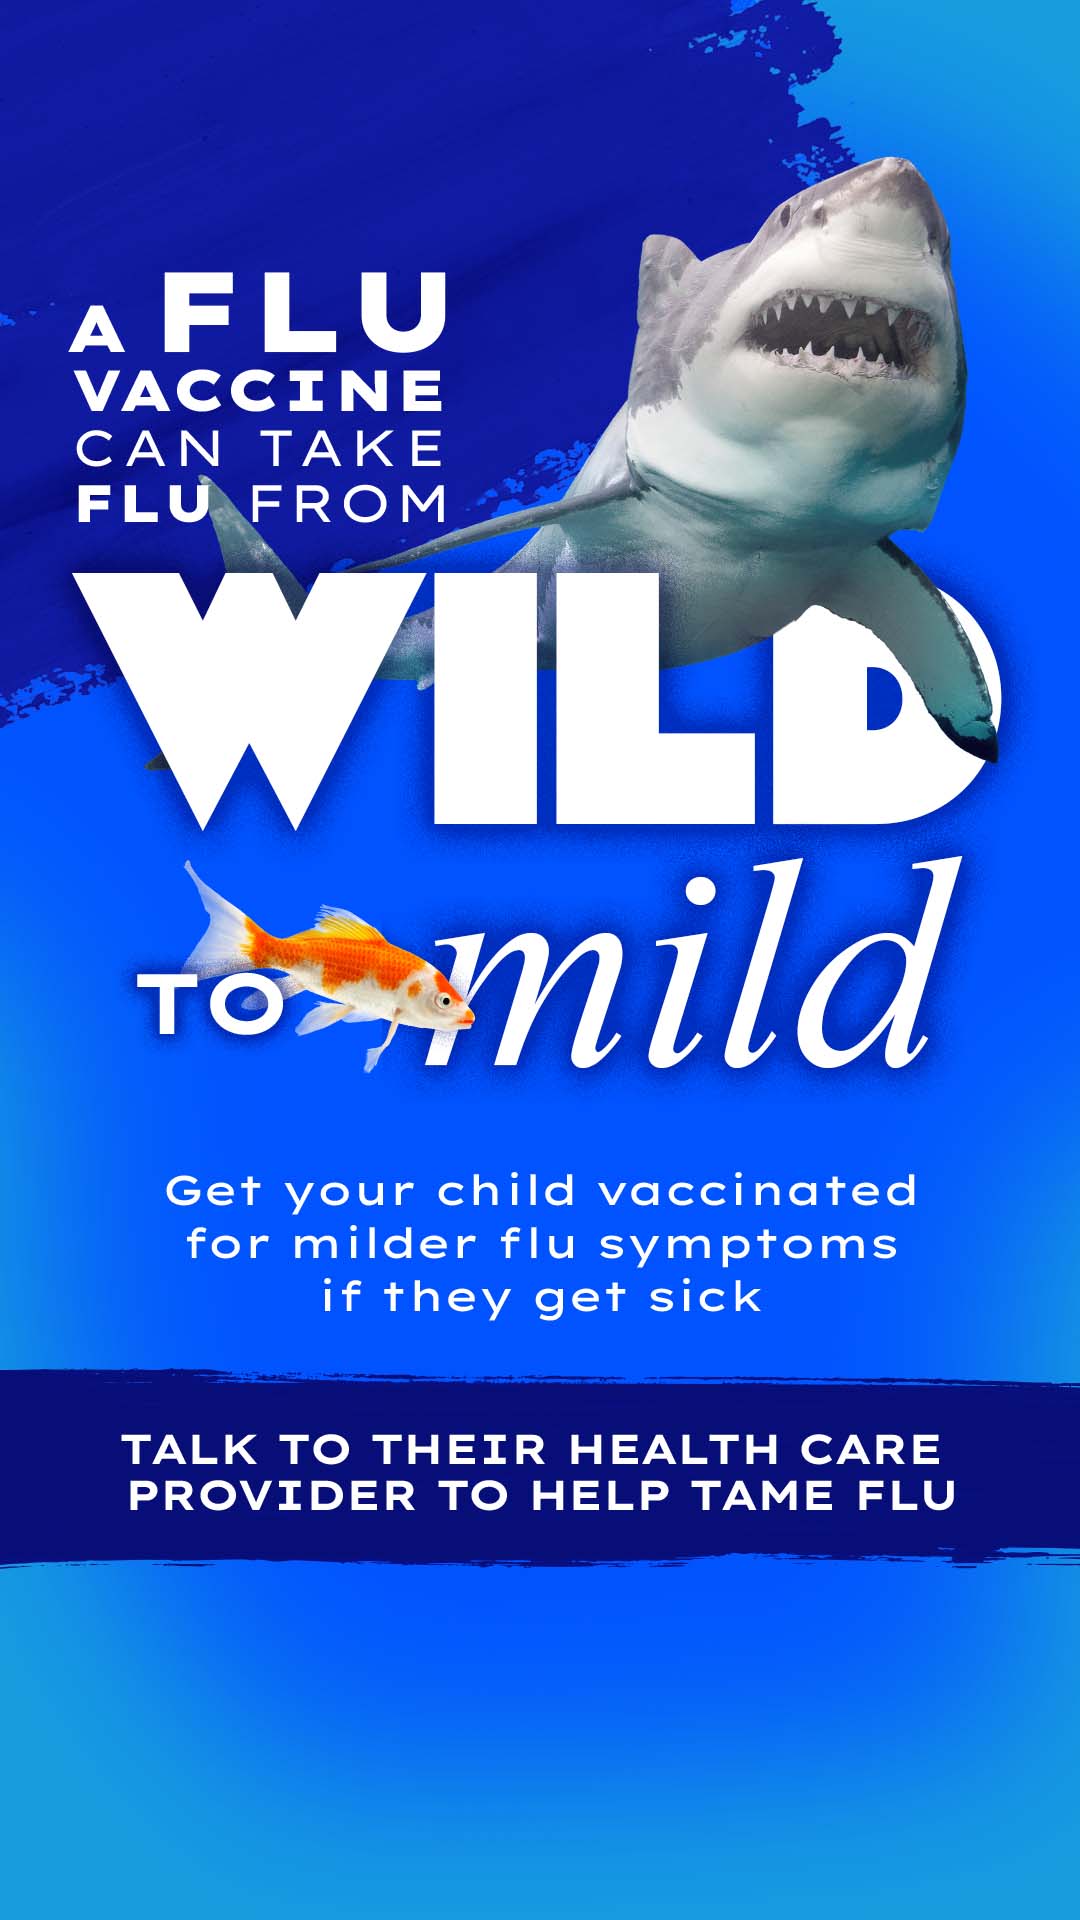 A flu vaccine can take flu from wild to mild Get your Child vaccinated for milder flu symptoms if they get sick Tal to their Health care provider to help tame flu